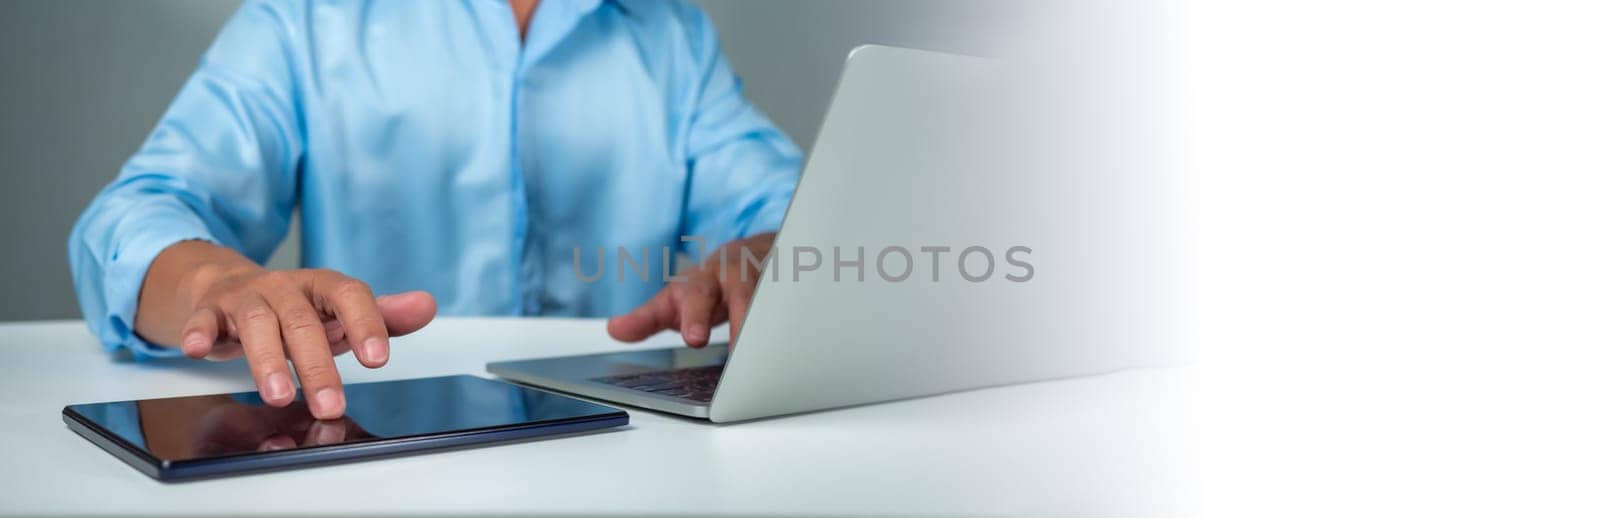 Businessman using tablet to login represents protection concept of cyber security and data security including secure login. by Unimages2527